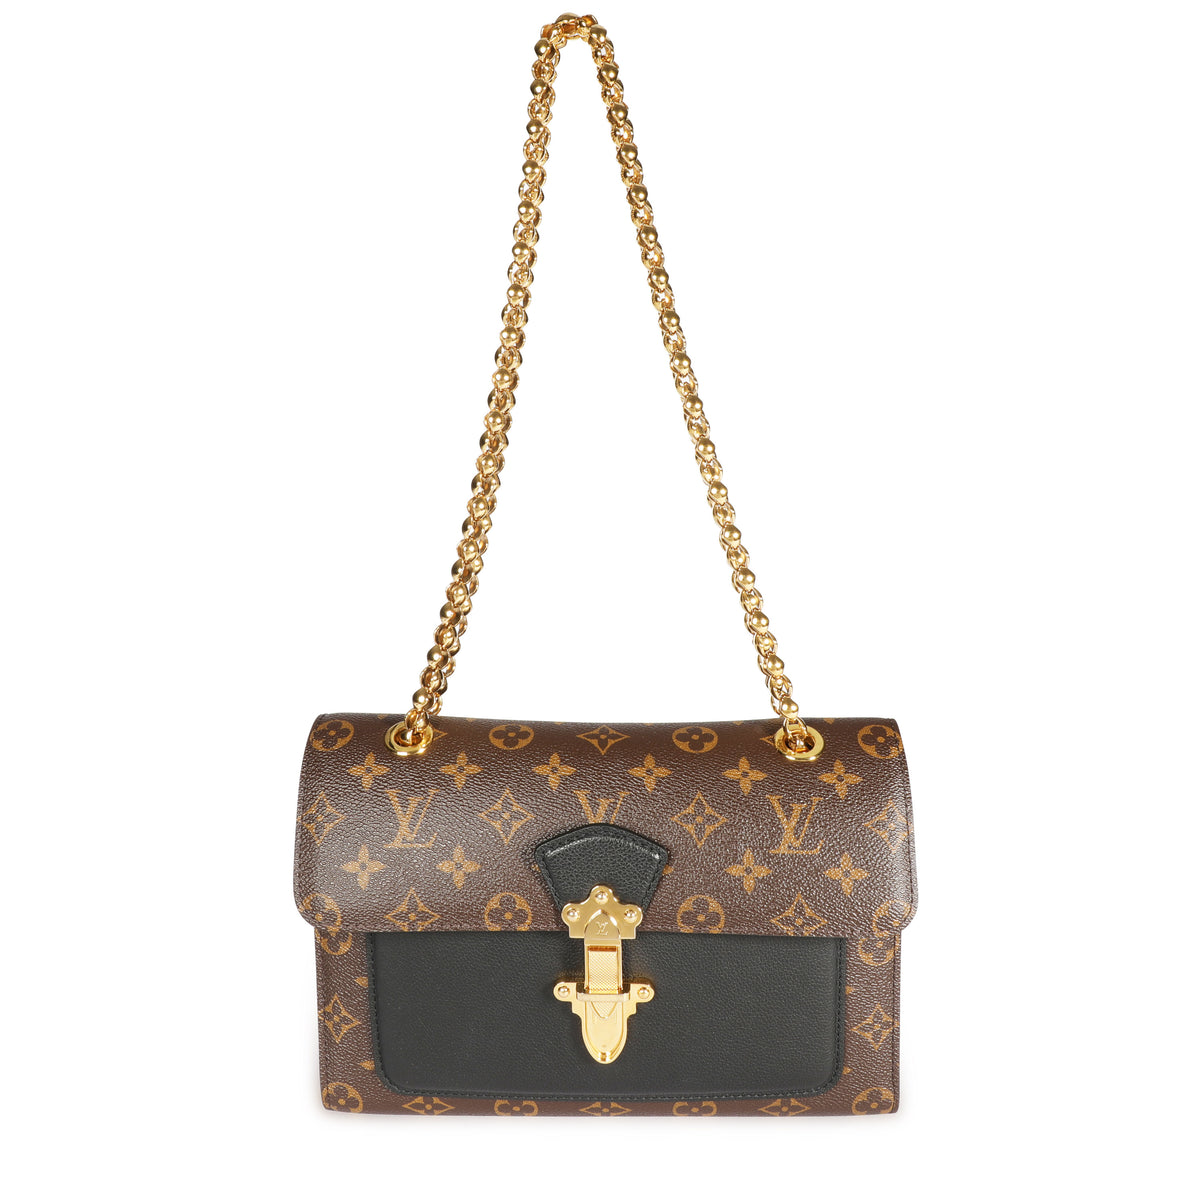 Louis Vuitton Victoire Review - A Classic Flap Bag Style in LV